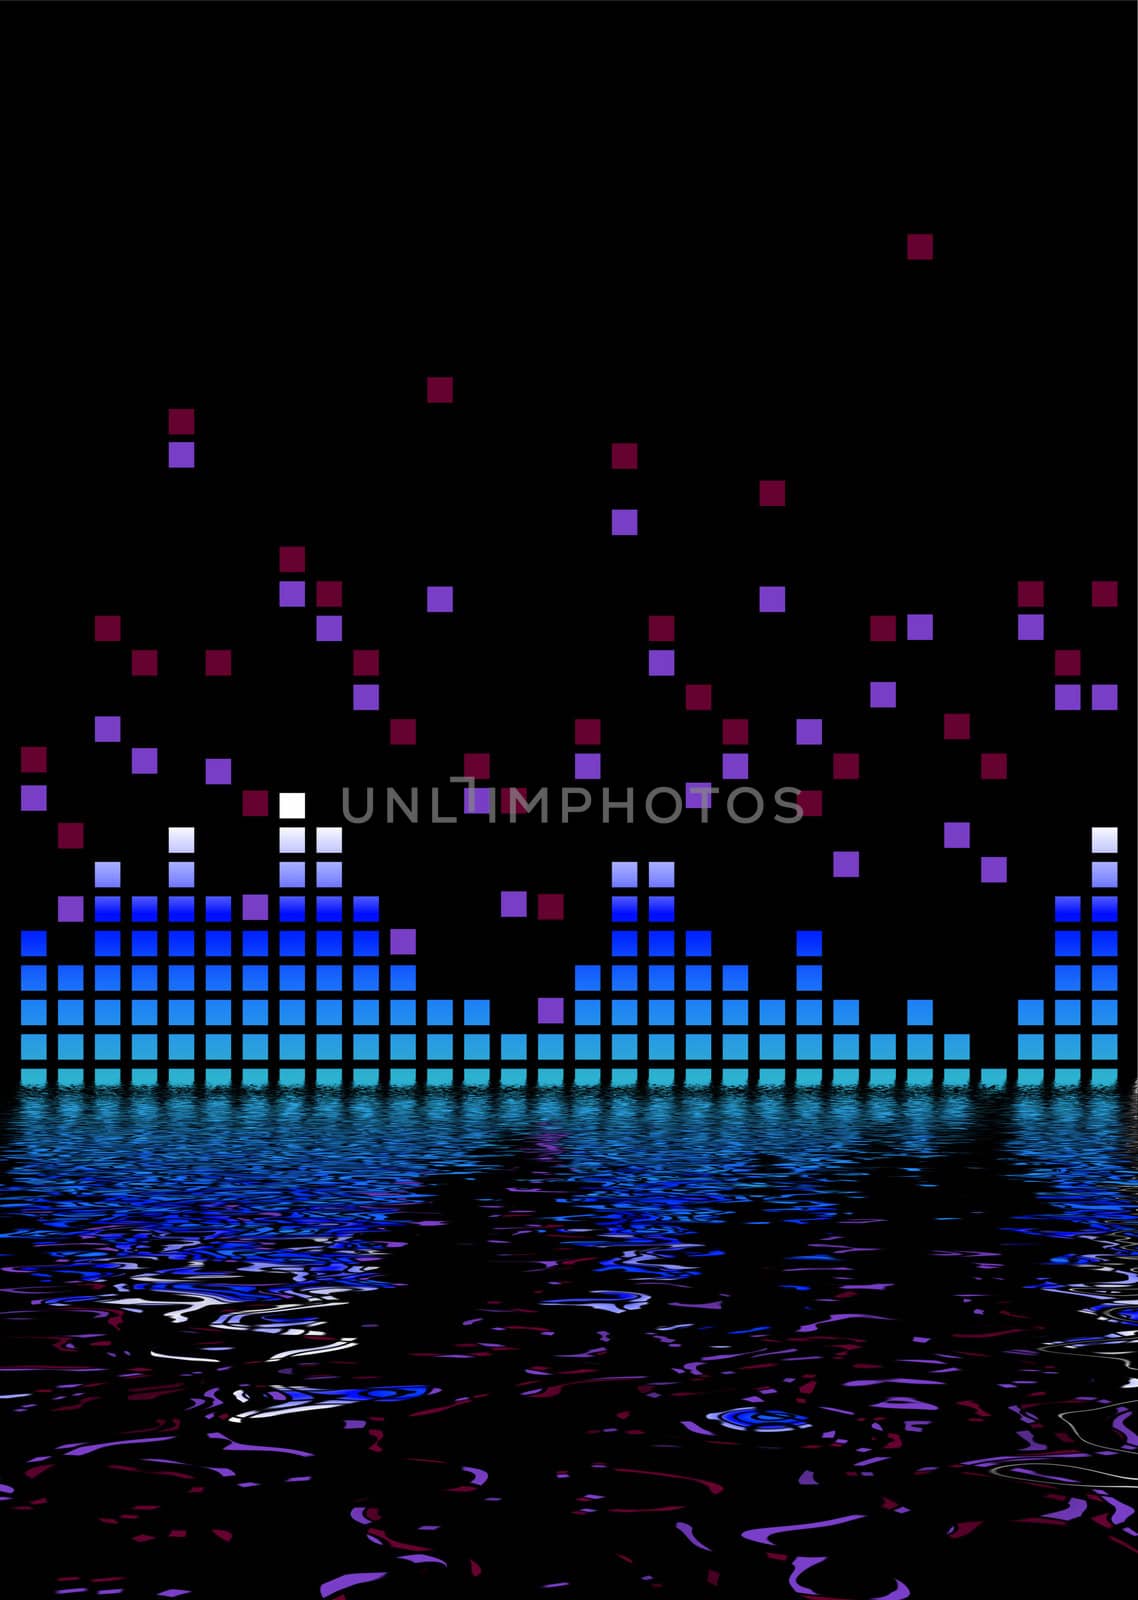 Graphic equaliser interface with a watery reflection background